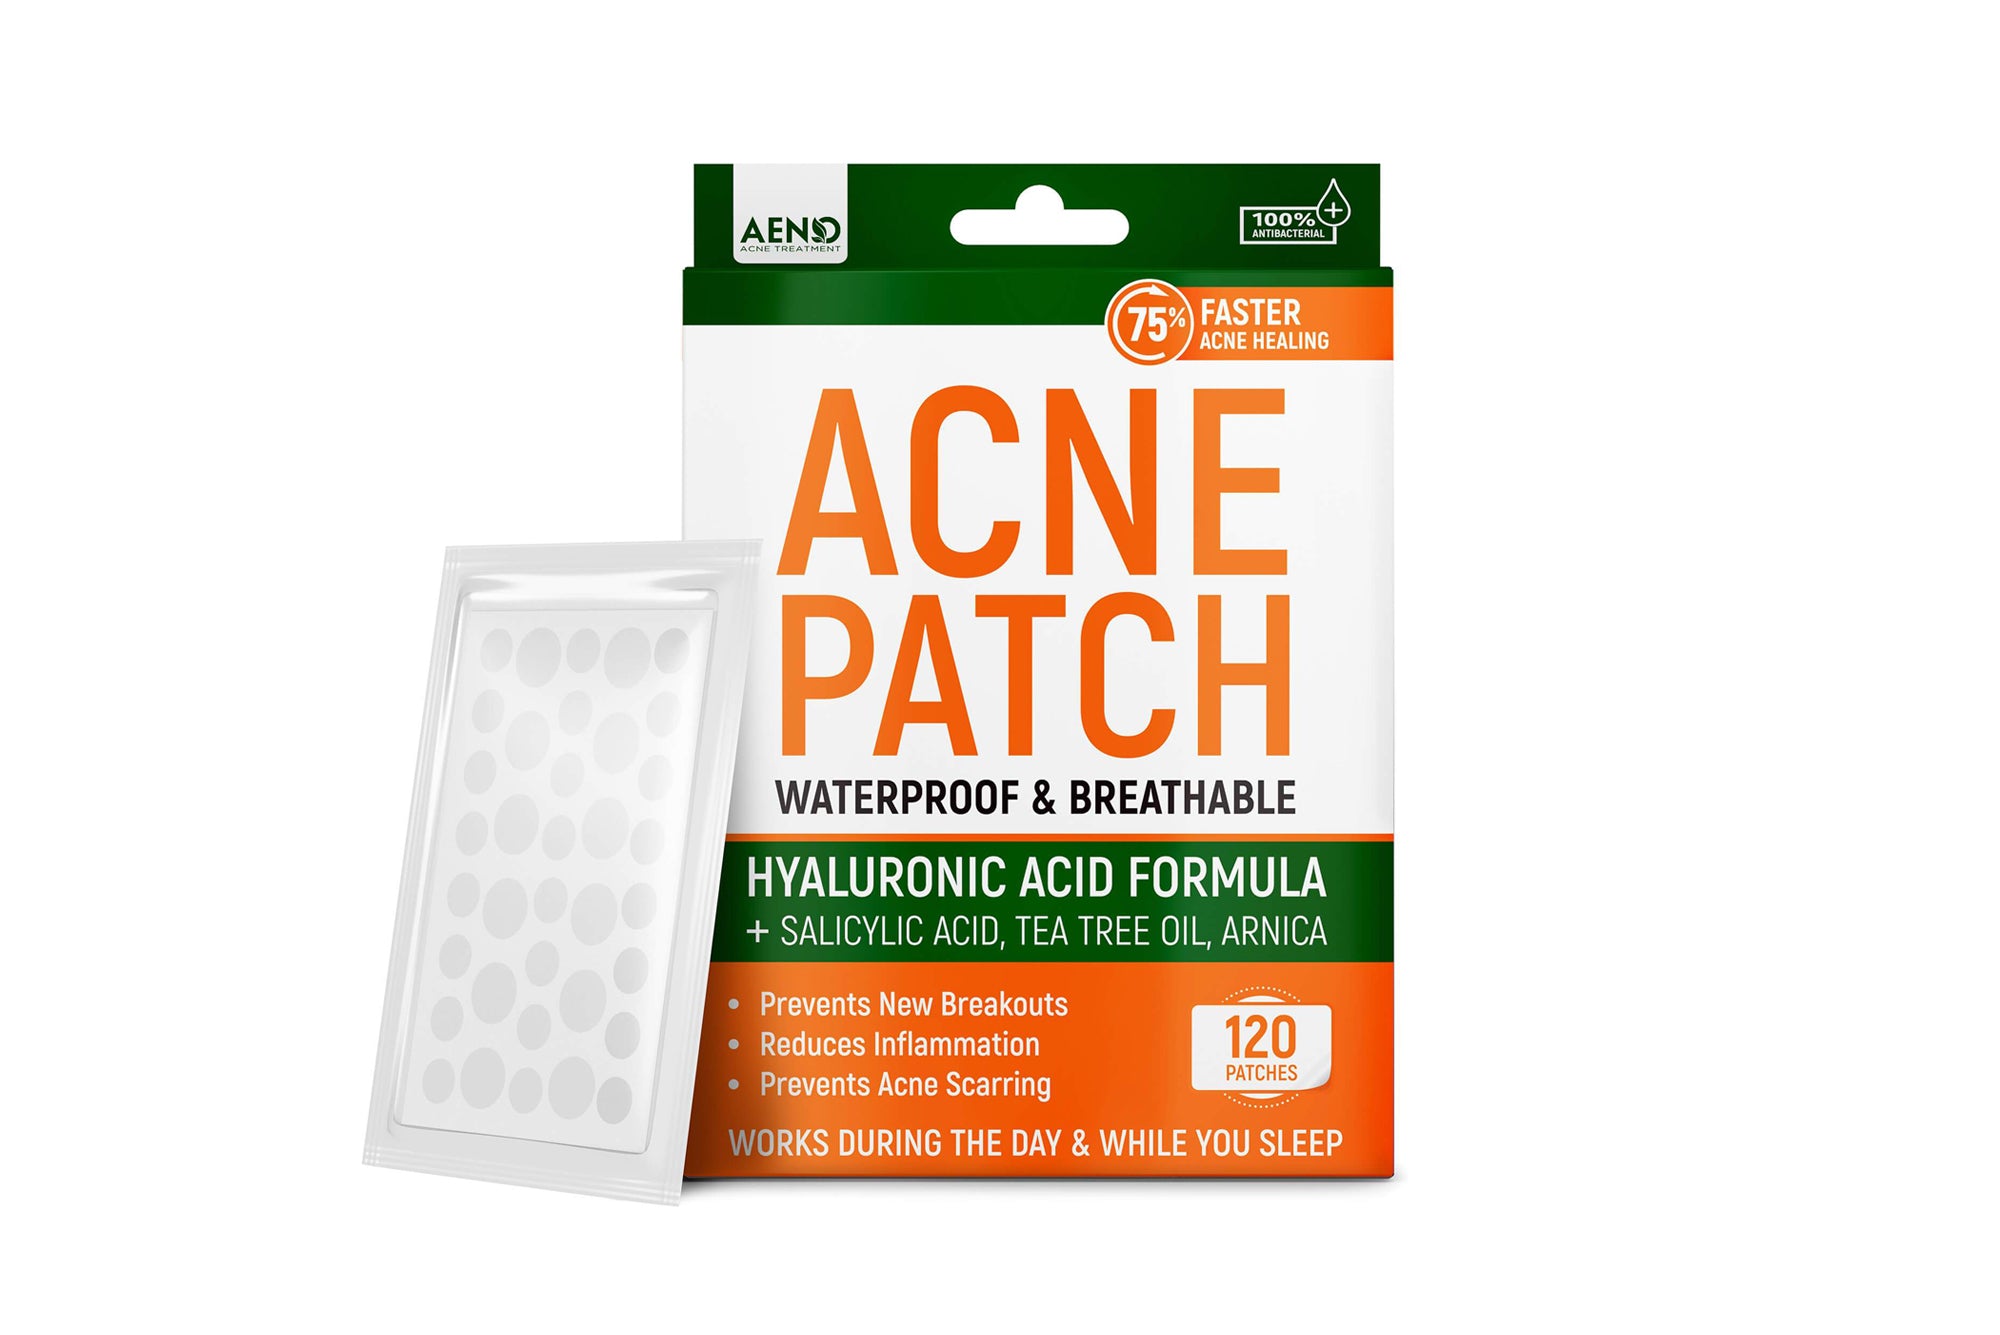 acne patches from aeno